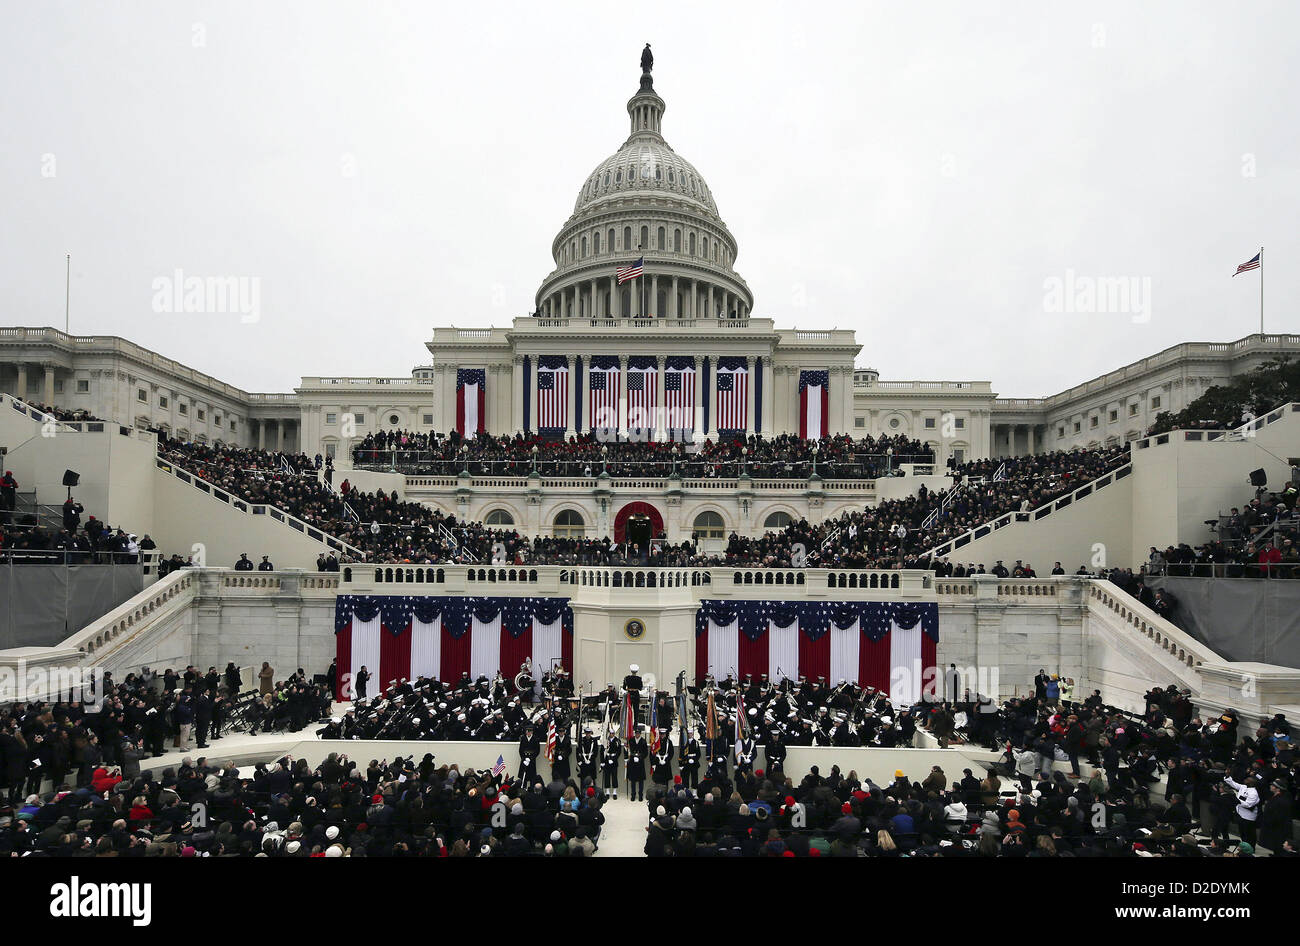 Jan. 21, 2013 - Washington, District Of Columbia, USA - President Barack Obama waves after his Inaugural speech at the ceremonial swearing-in on the West Front of the U.S. Capitol during the 57th Presidential Inauguration in Washington, Monday, Jan. 21, 2013. (Credit Image: © Scott Andrews/Pool/Prensa Internacional/ZUMAPRESS.com) Stock Photo